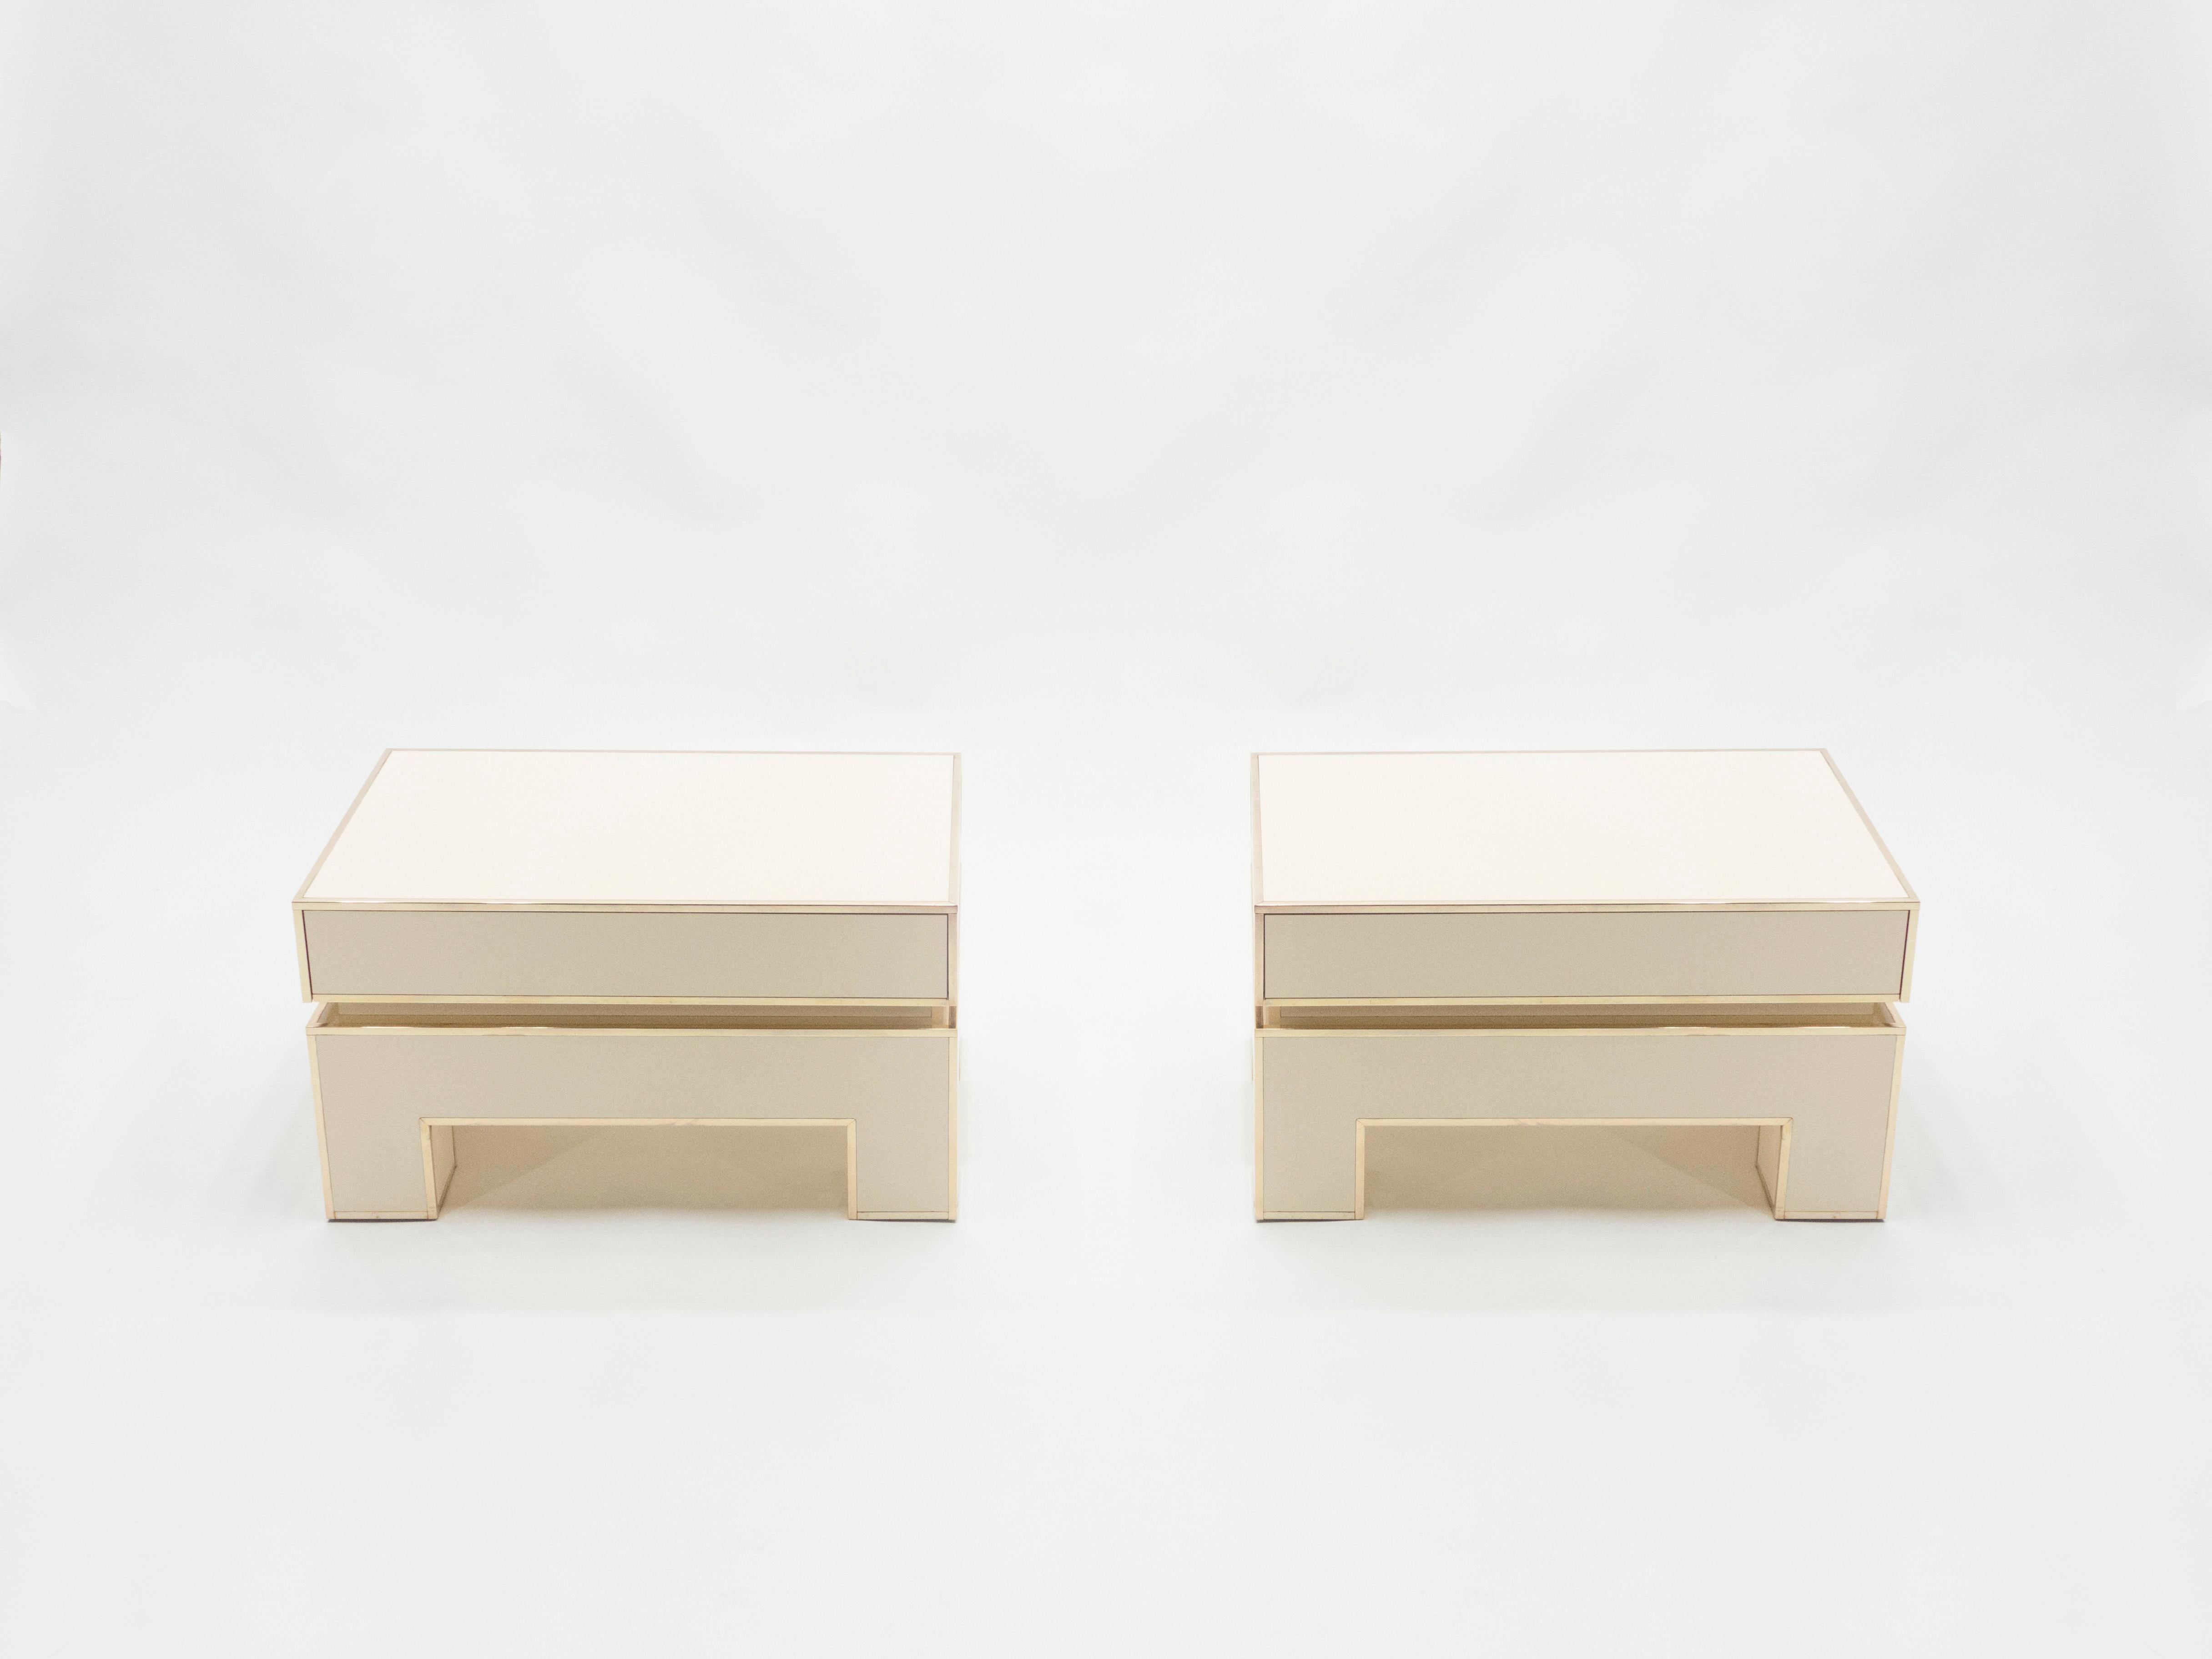 Crispy white lacquer, paired with bright brass accents, feels crisp and luxe on this pair of end tables or low nightstands. Signed by Alain Delon and edited by Maison Jansen in 1975. Their boxy, simple style is typical of both the 1970s and Maison